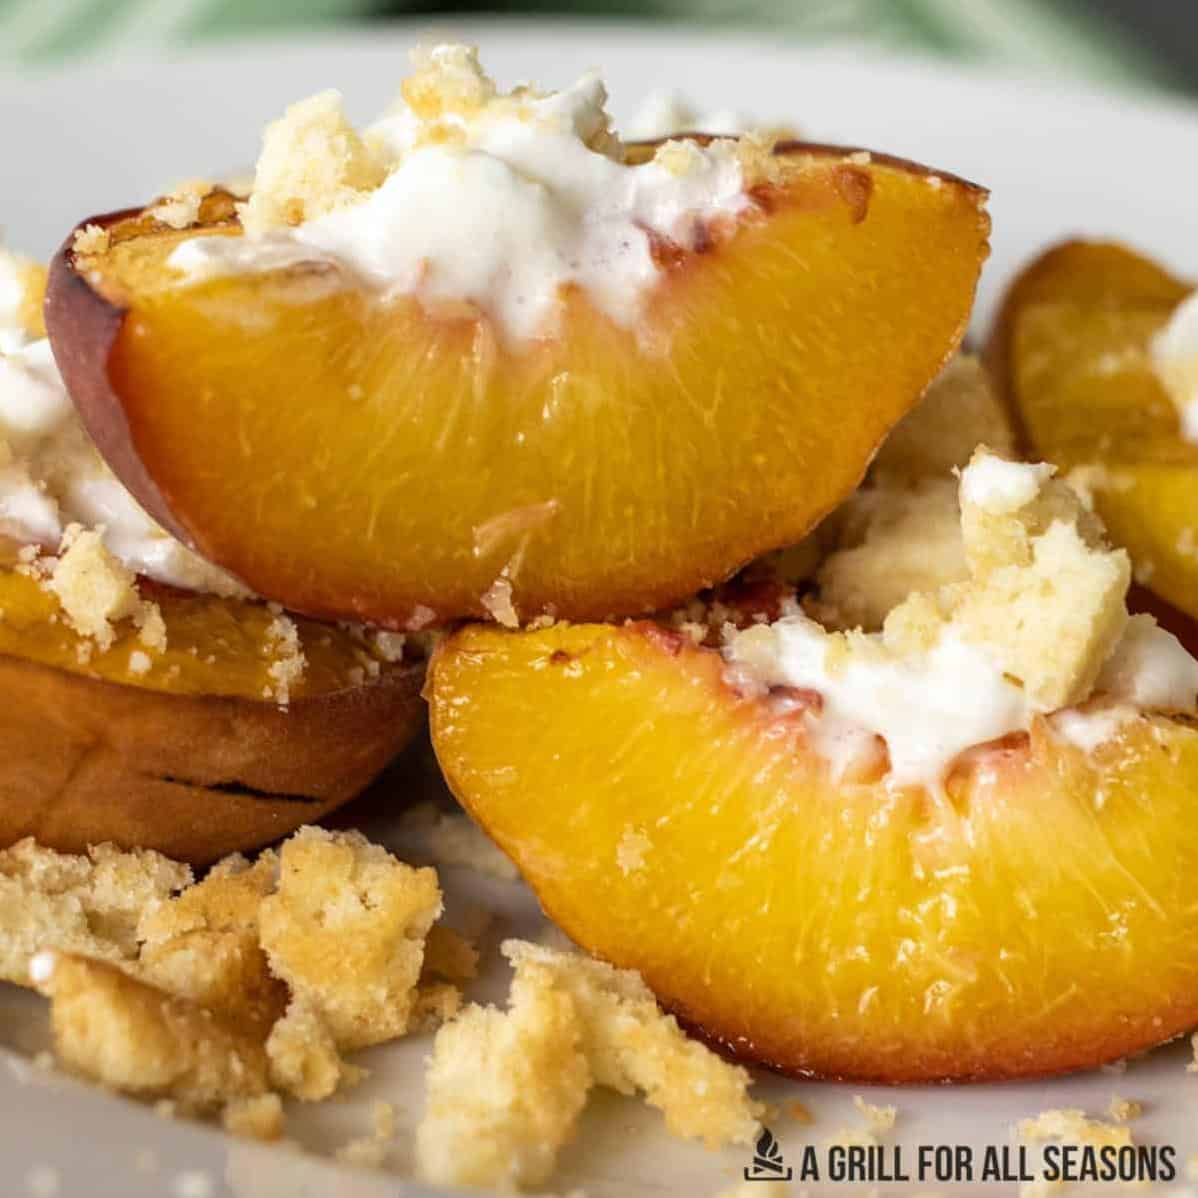  Smoked peaches, pineapples, and strawberries, oh my!